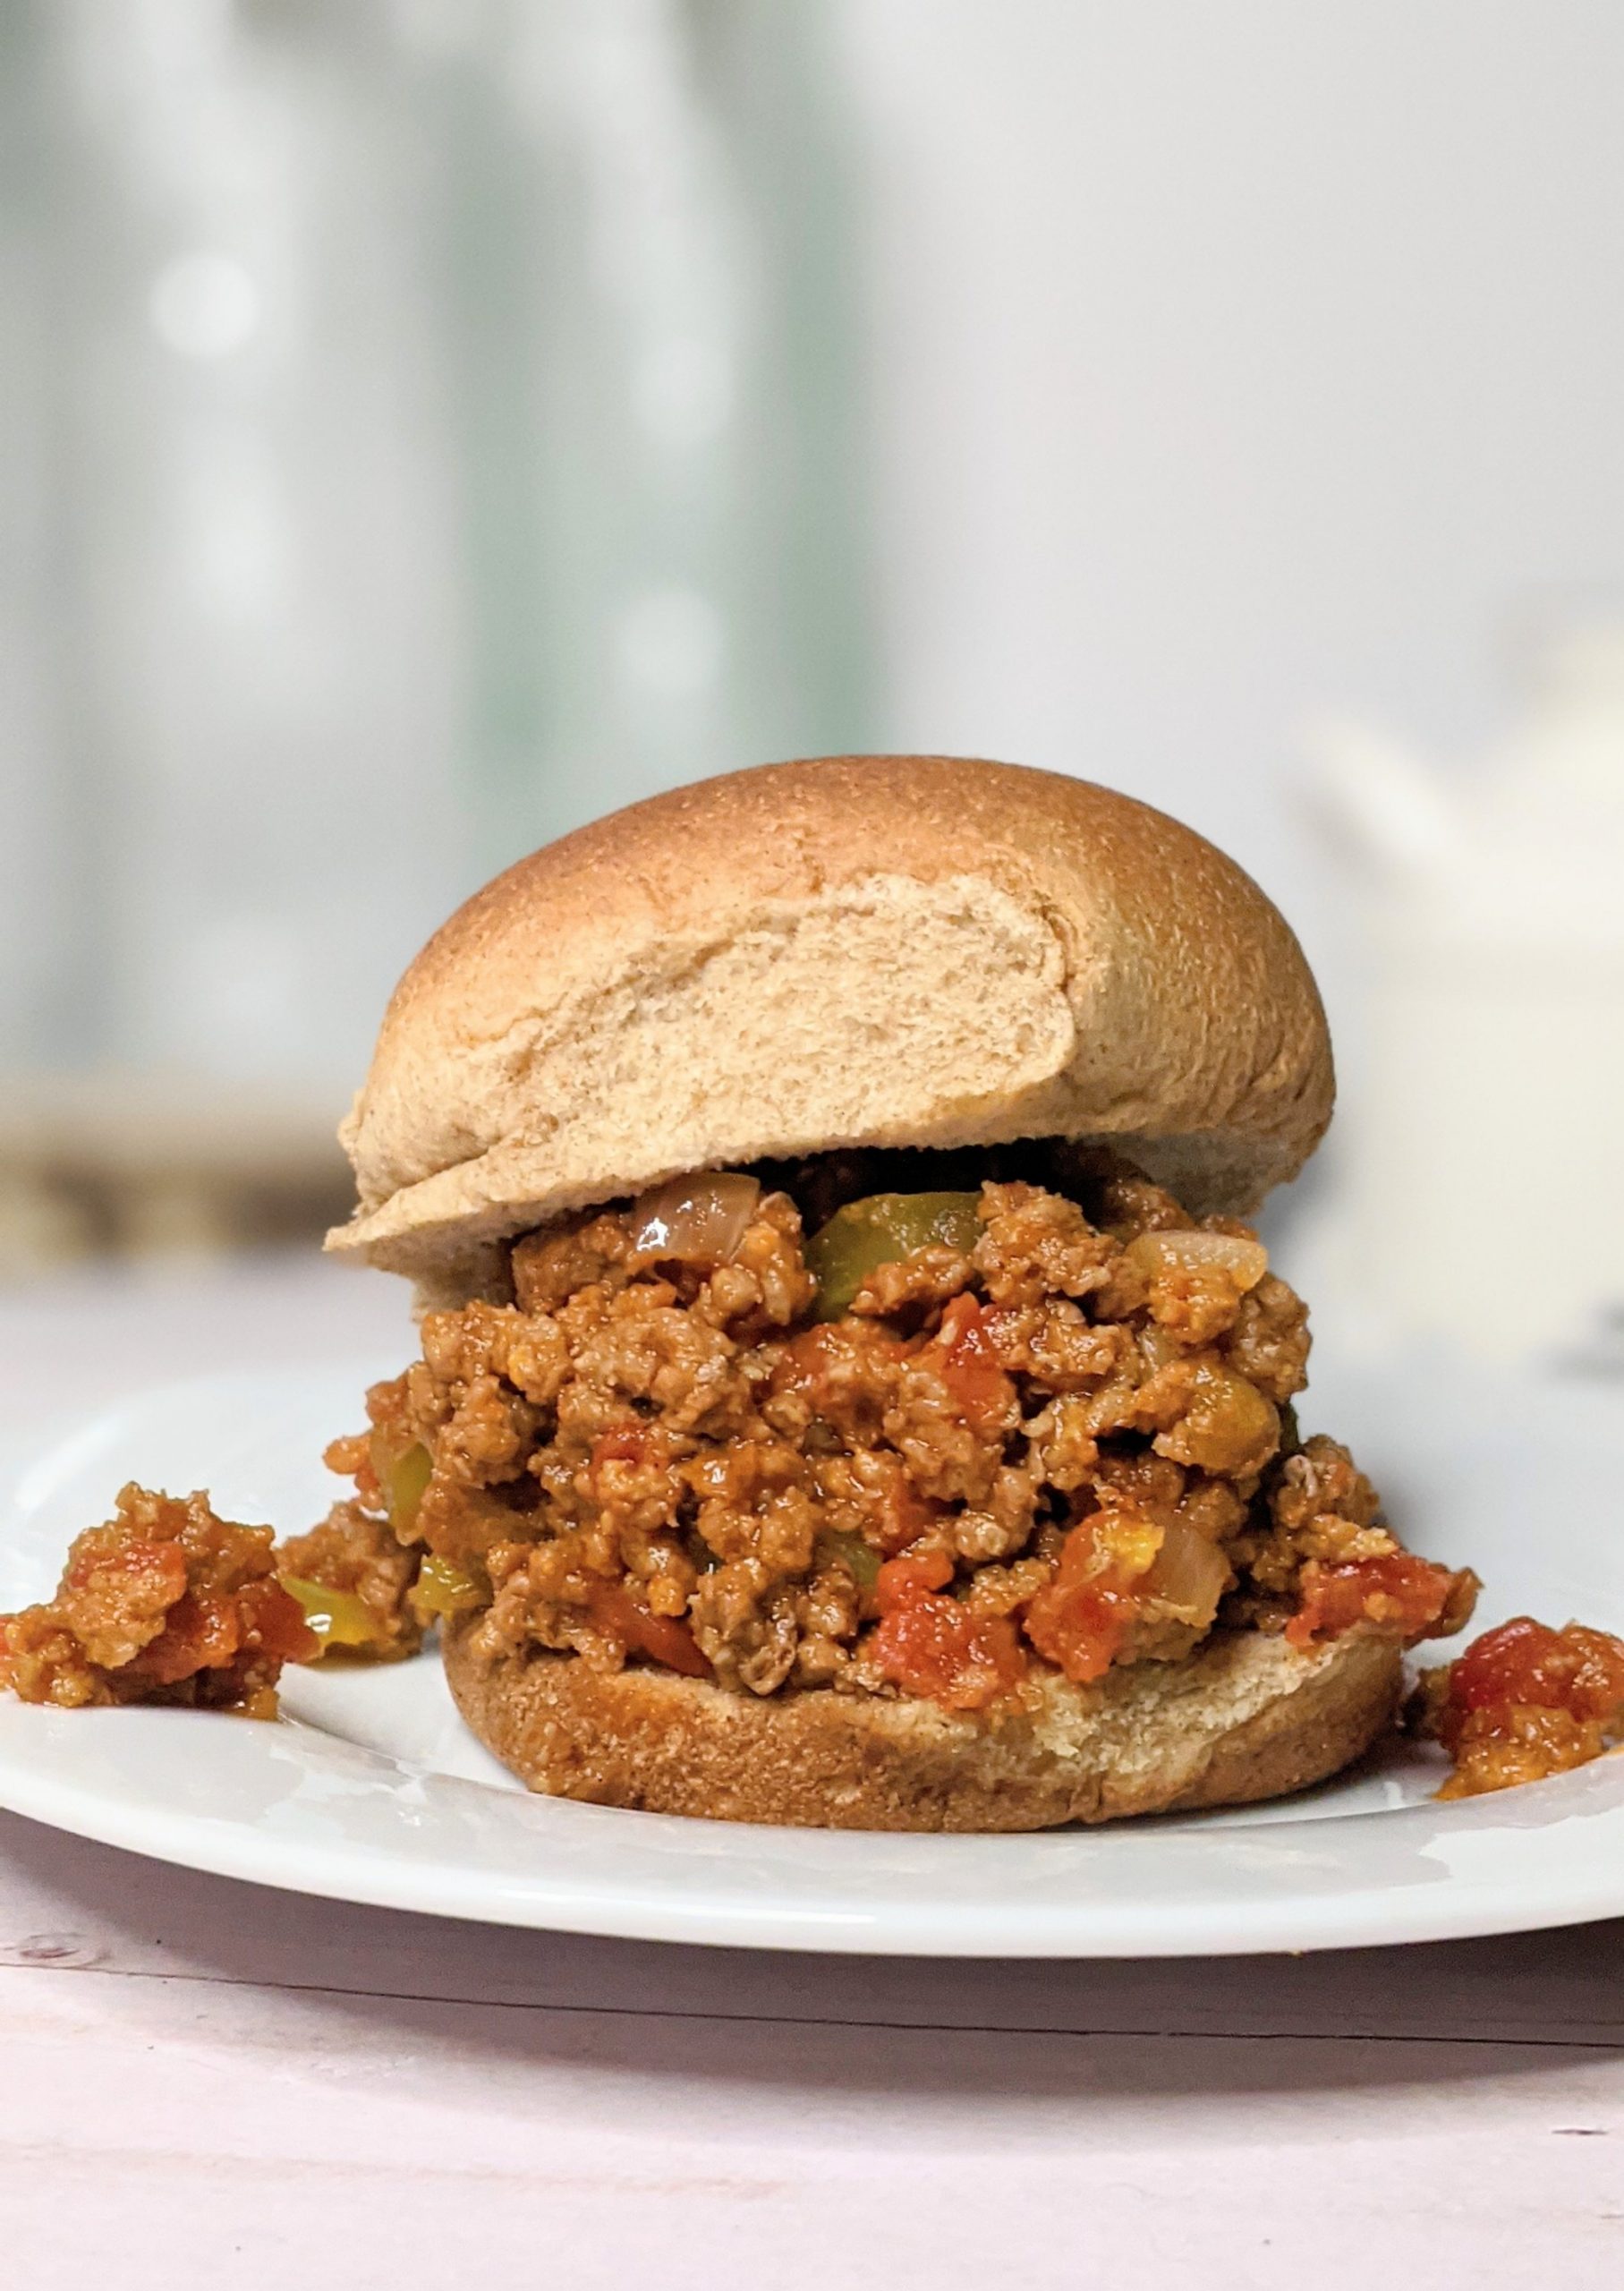 make sloppy joes from scratch with tomatoes peppers ground beef sandwiches low sodium recipes for kids and families low salt dinner ideas